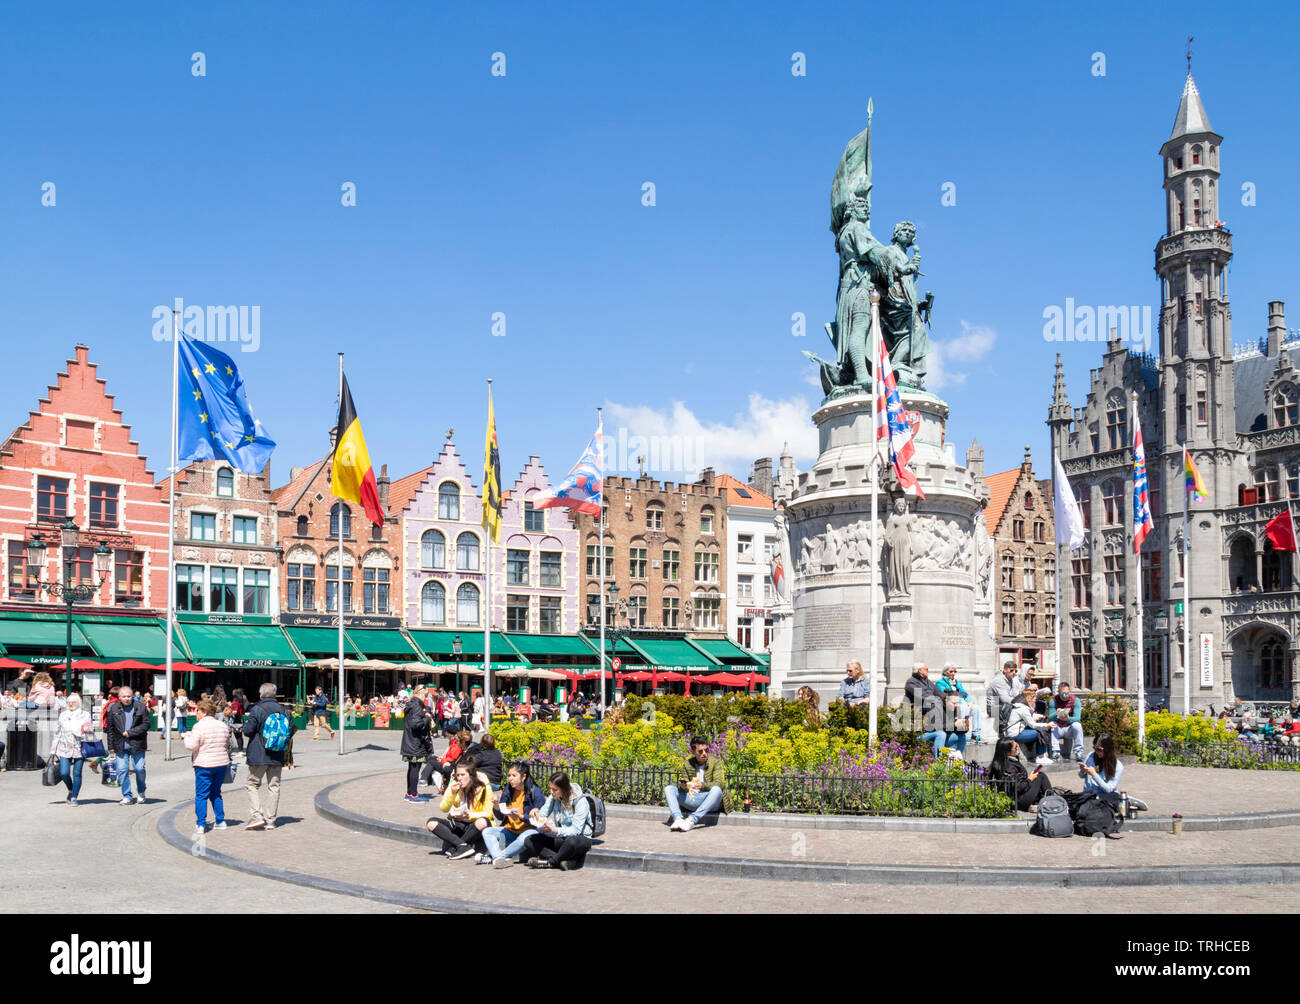 Old buildings with ornate gables in the Historic square with statue of Jan breydal and pieter de coninck in the Markt central Bruges Belgium EU Europe Stock Photo